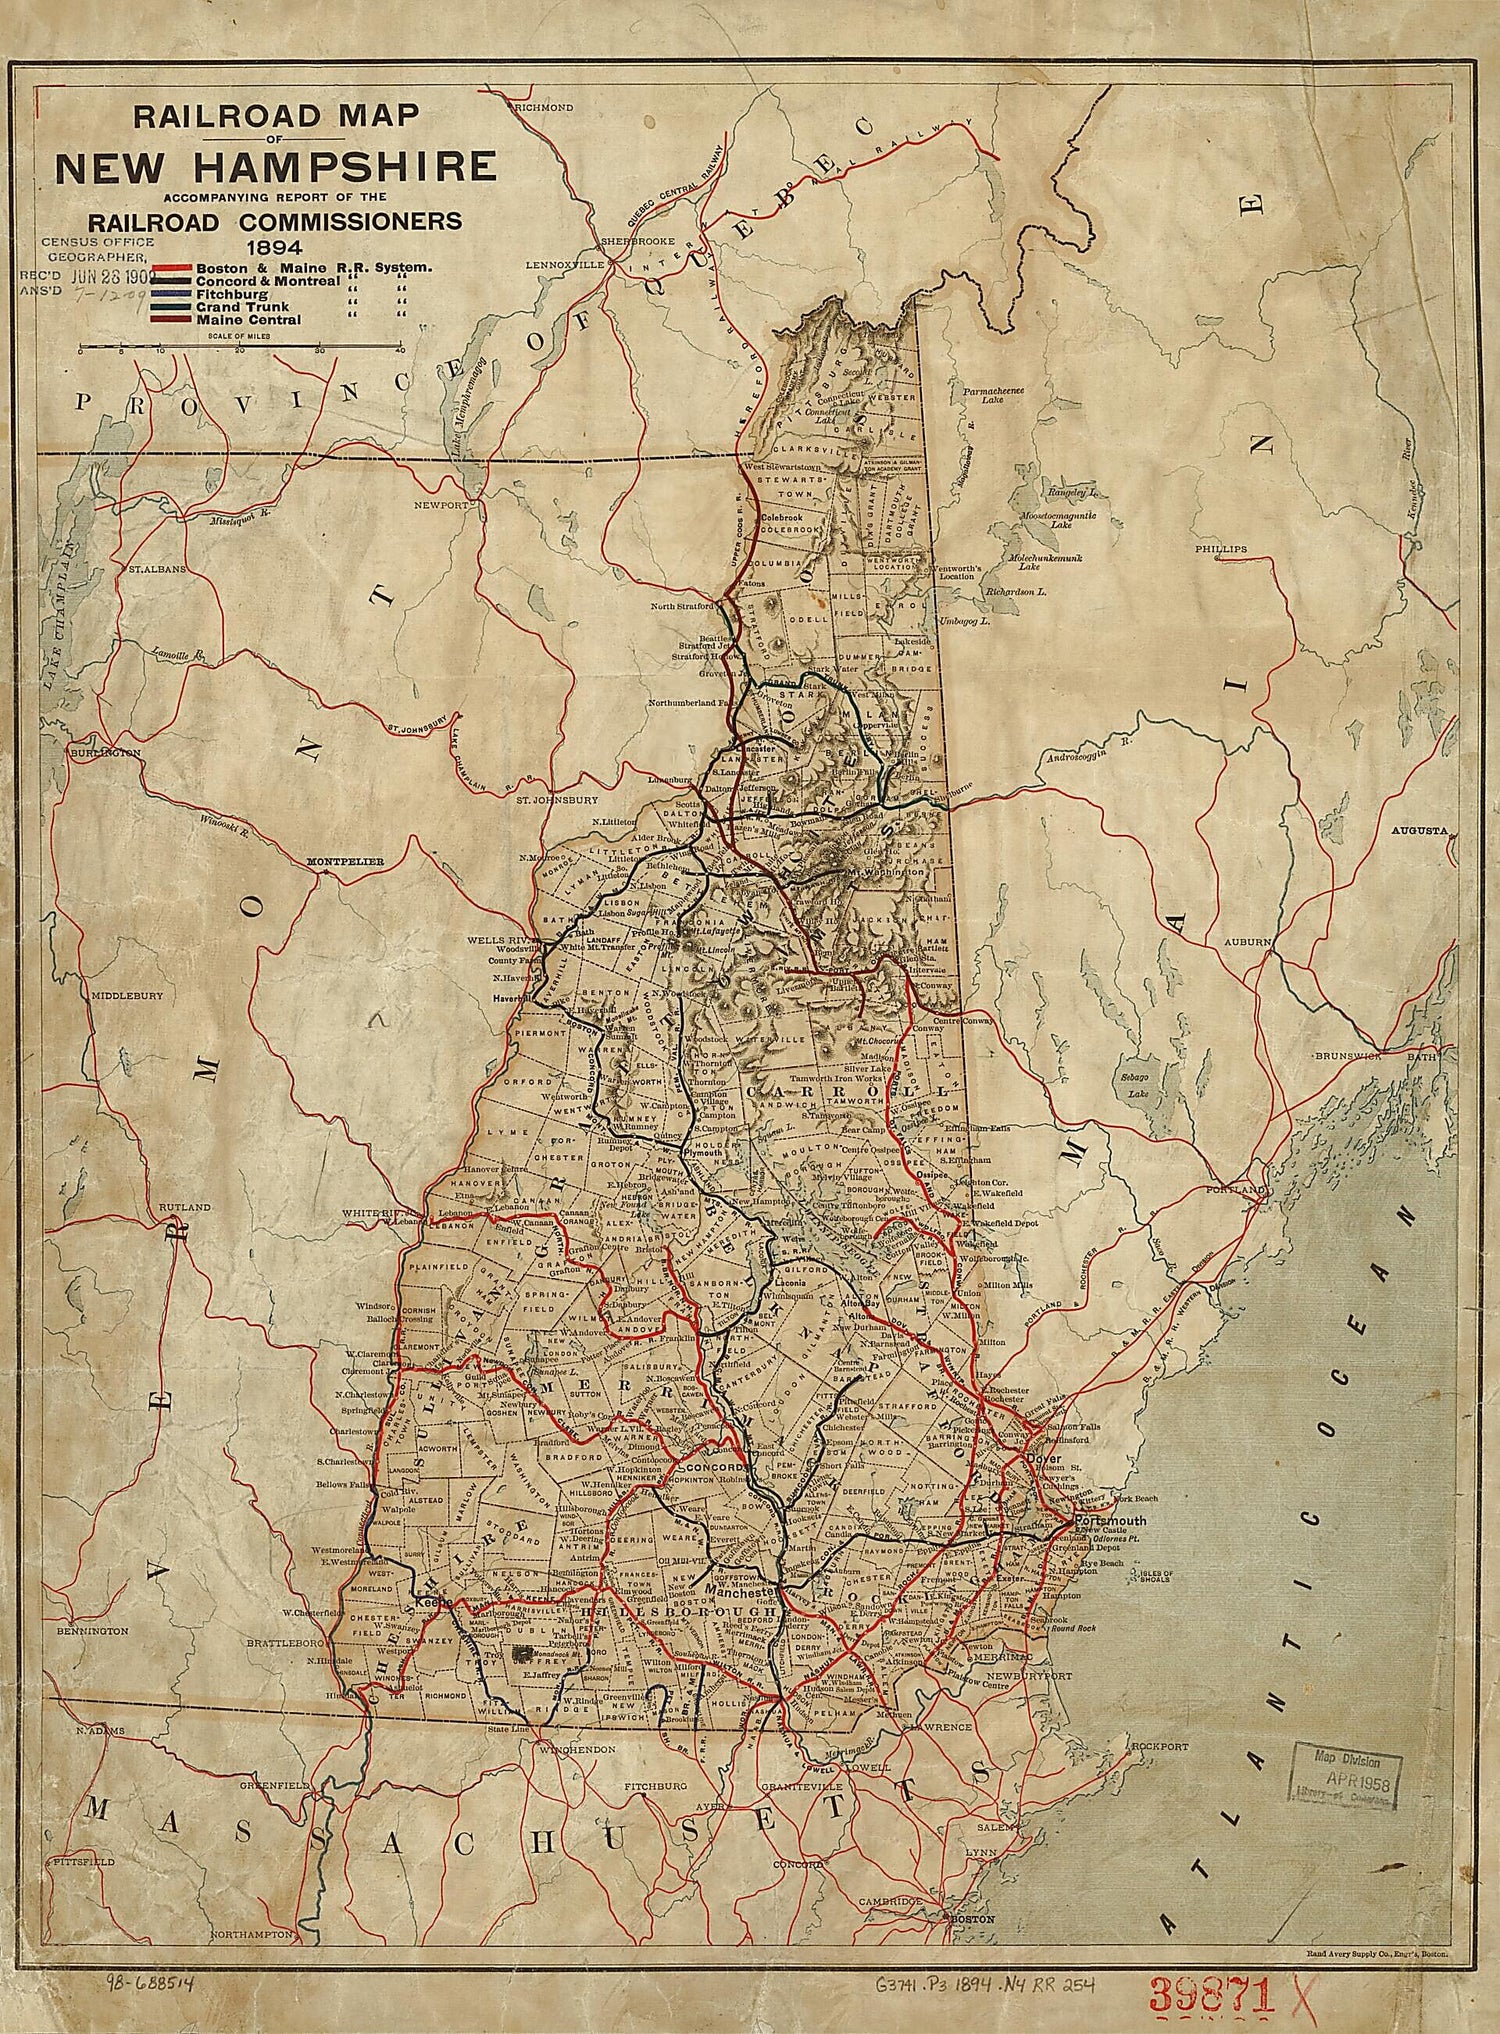 This old map of Railroad Map of New Hampshire Accompanying Report of the Railroad Commissioners, from 1894 was created by  New Hampshire. Railroad Commissioners in 1894